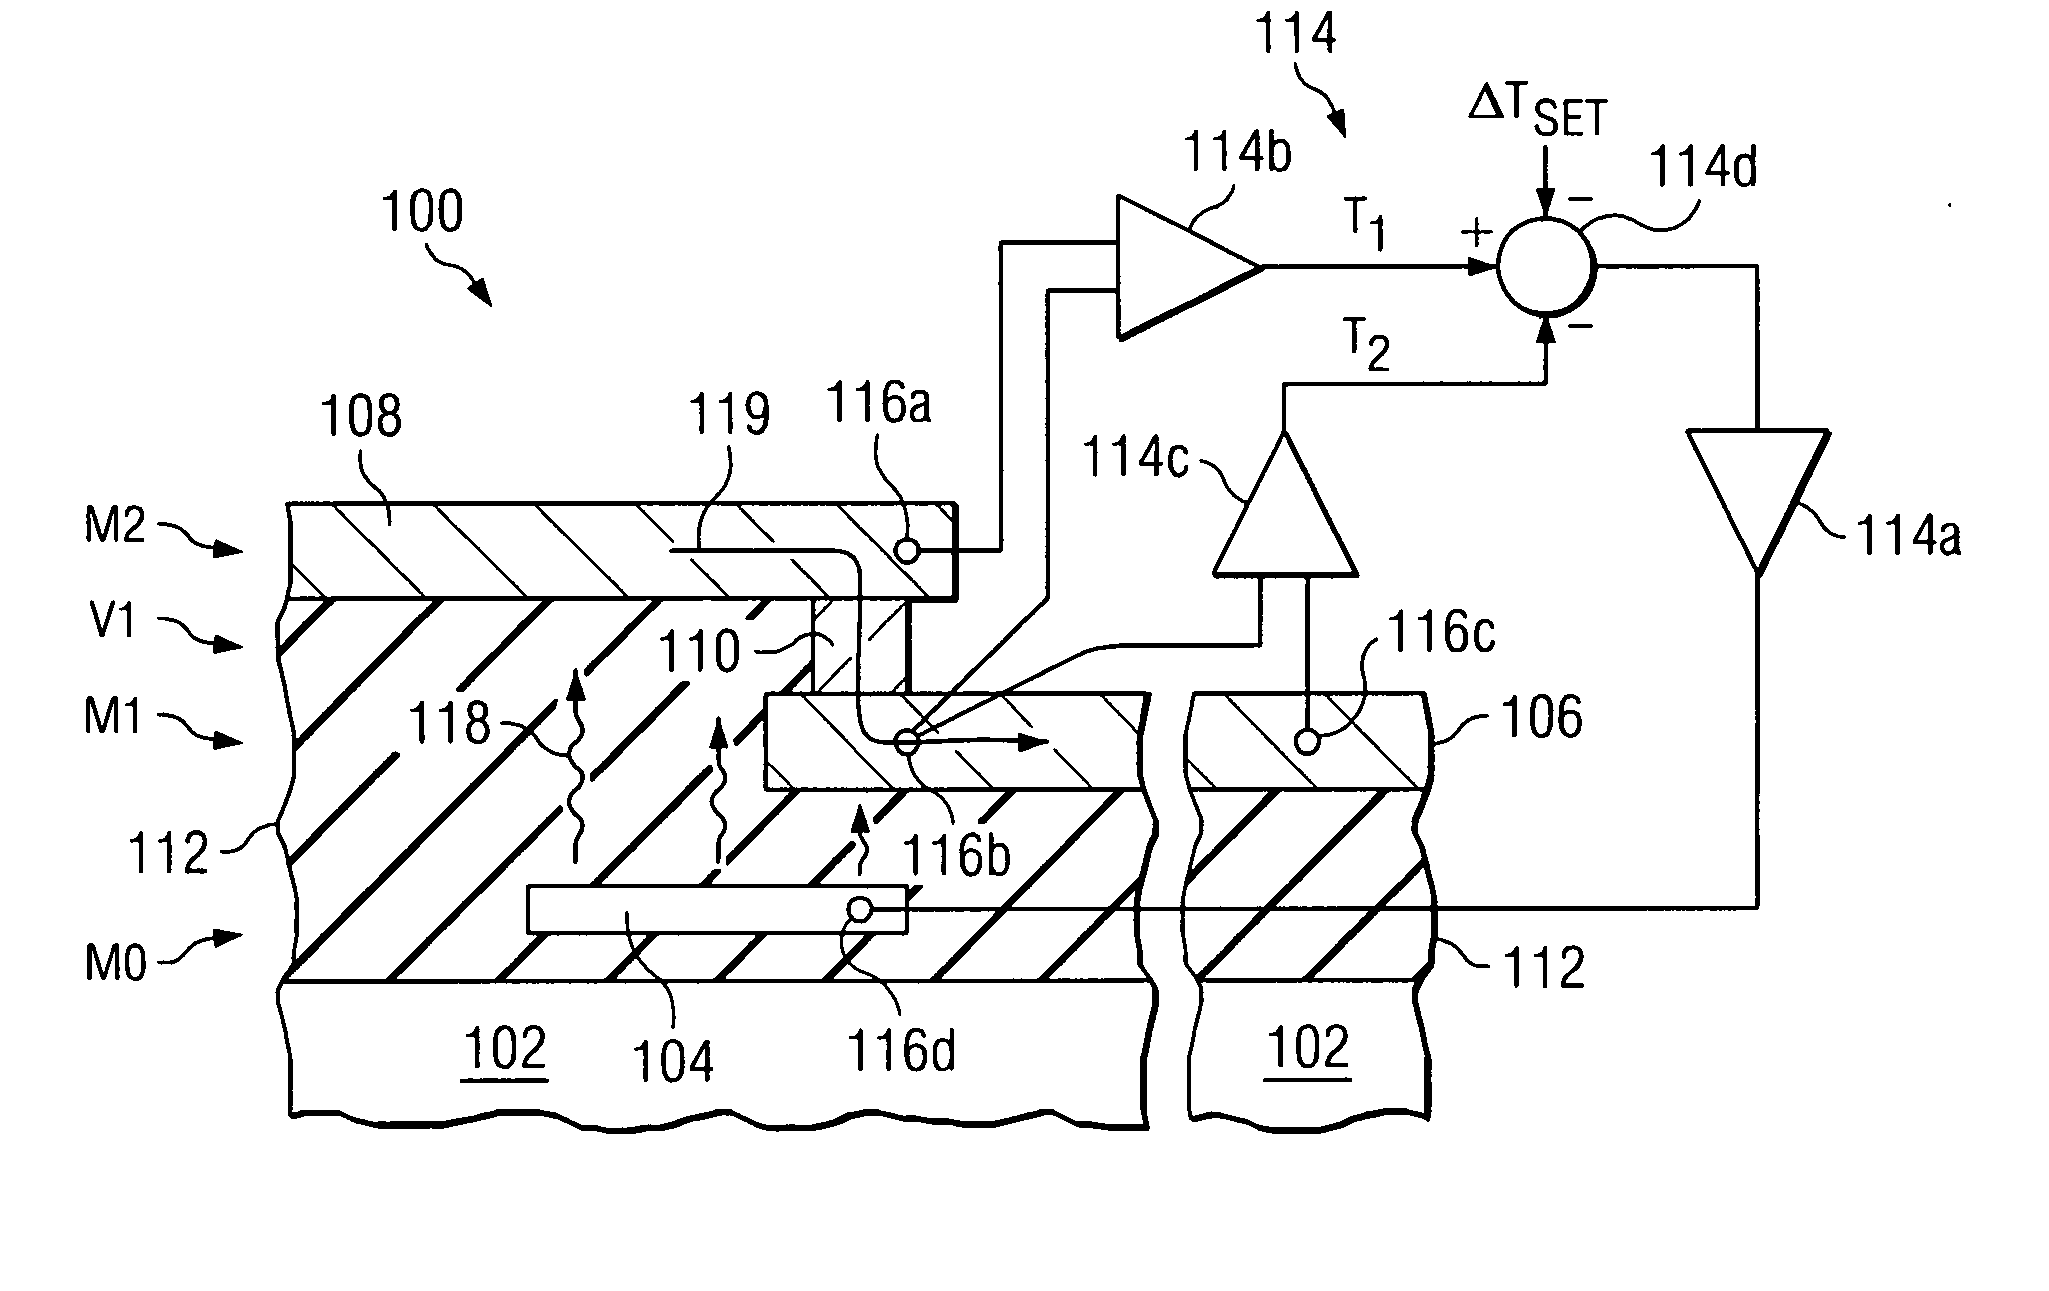 Semiconductor device test structures and methods